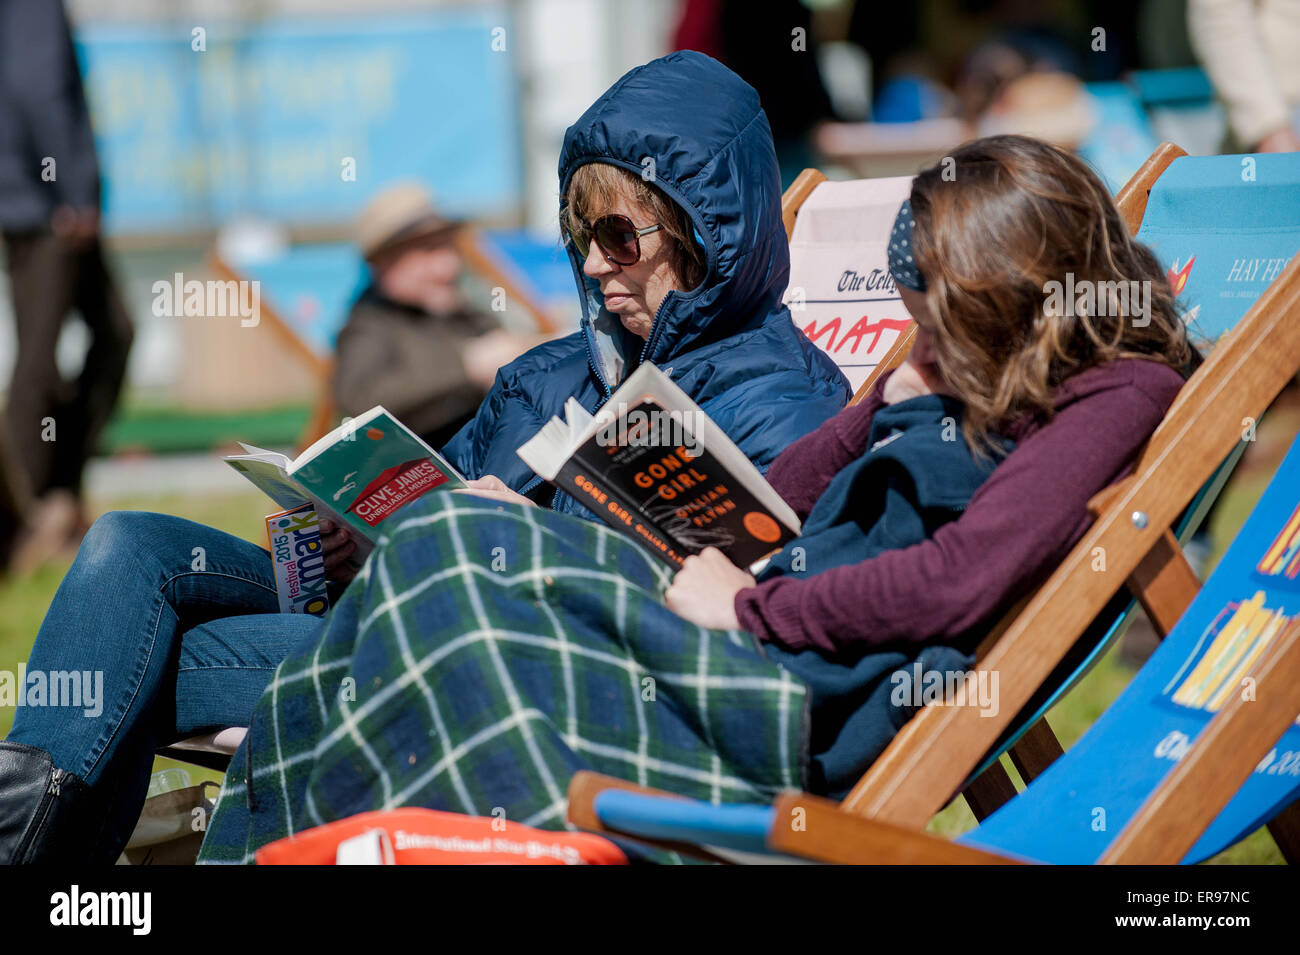 Hay on Wye, UK. Thursday 28 May 2015  Pictured: People read books in the sunshine at Hay Re: The 2015 Hay Festival takes place in Hay on Wye, Powys, Wales Stock Photo